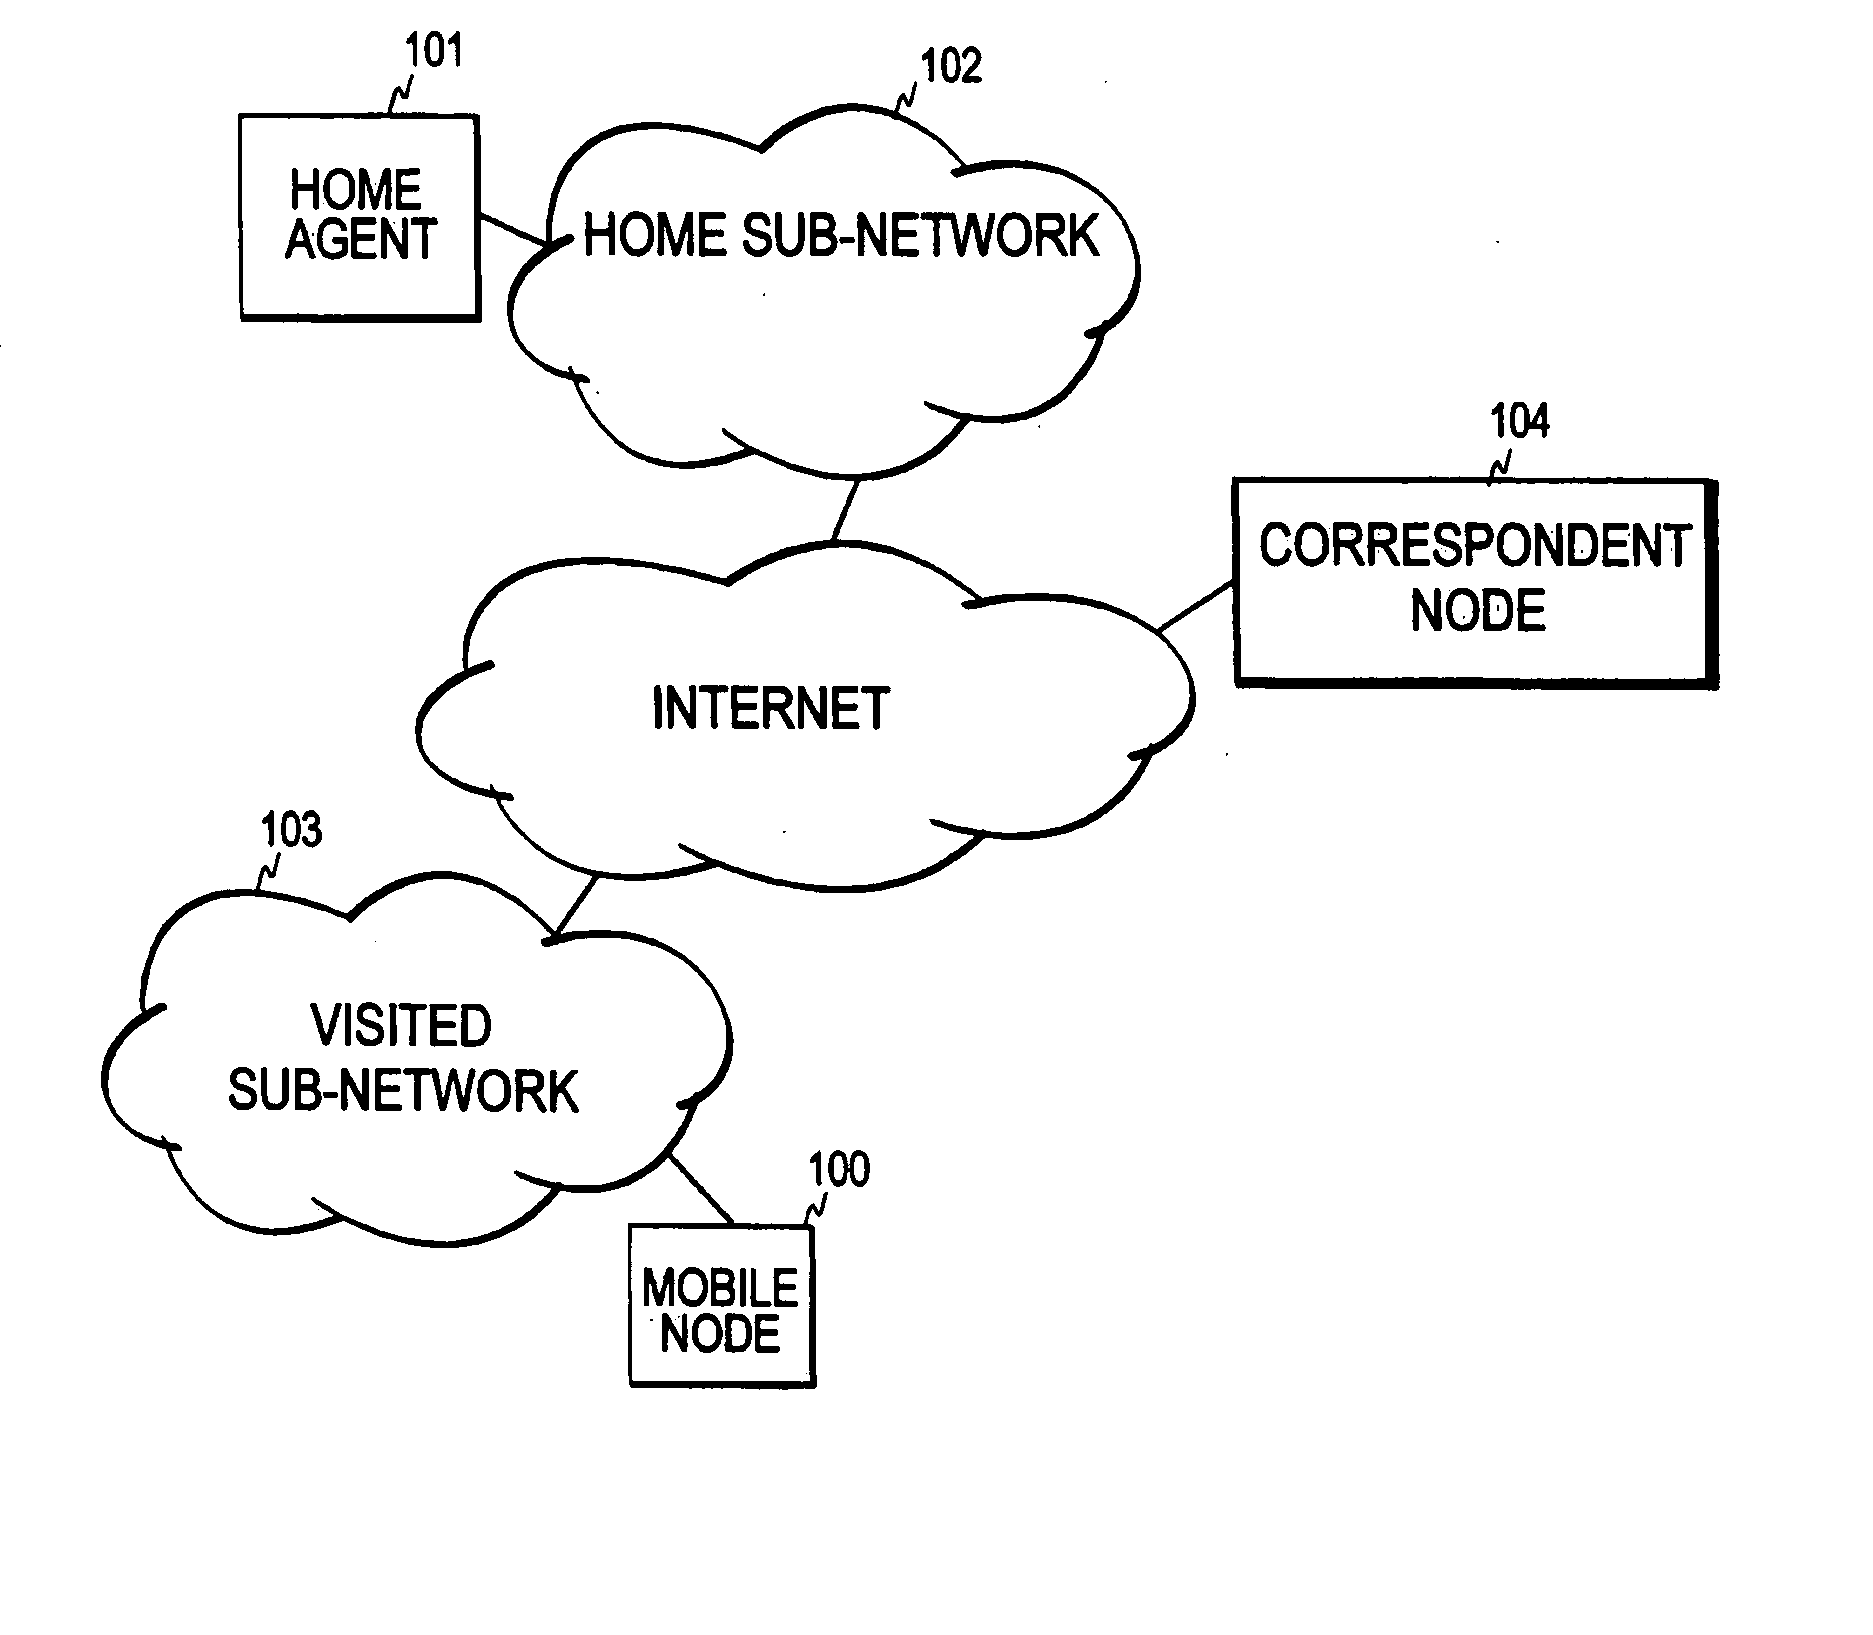 Location privacy in a communication system